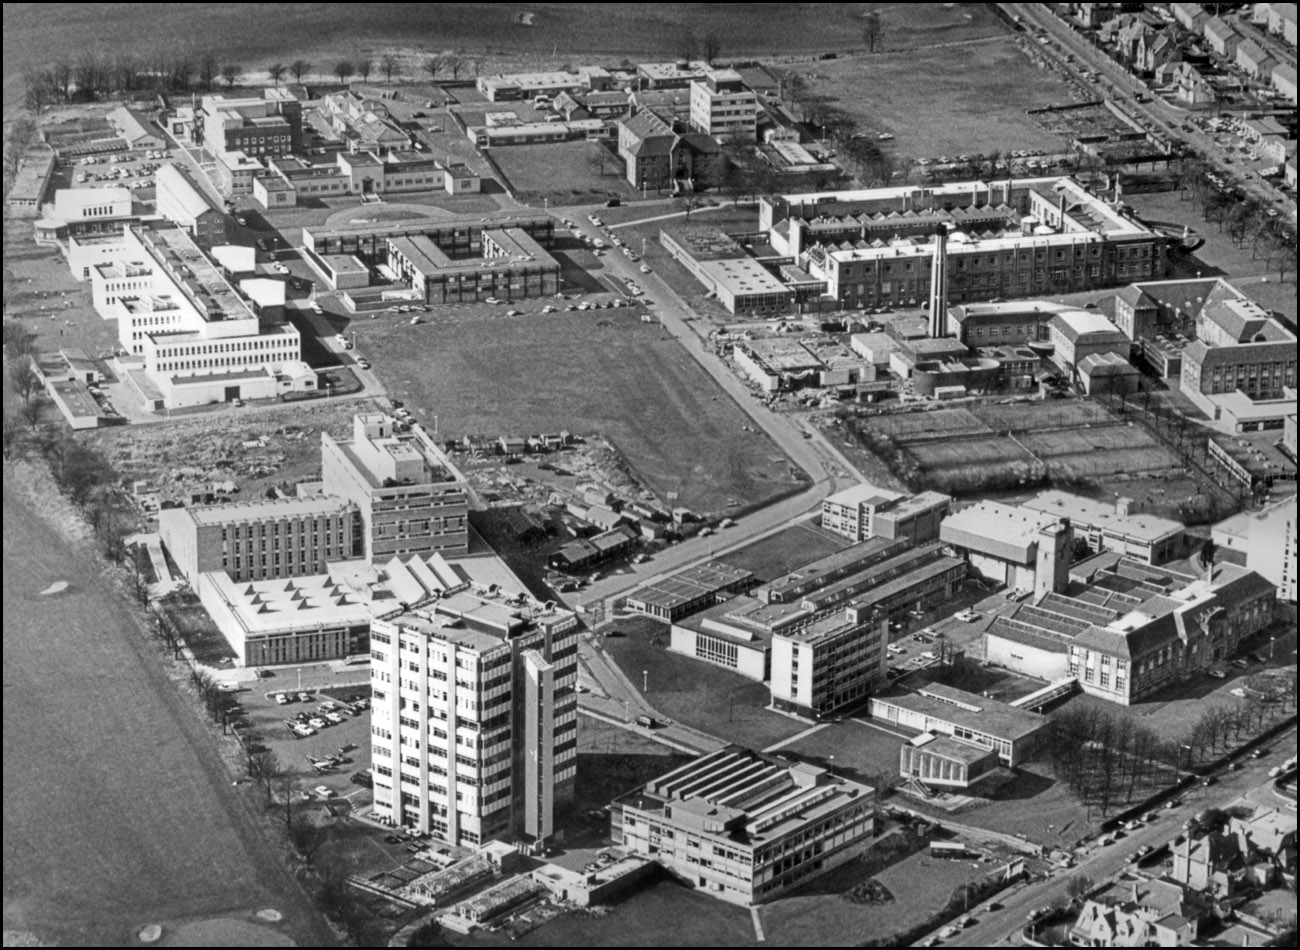 An aerial photograph of The King's Buildings campus in 1971